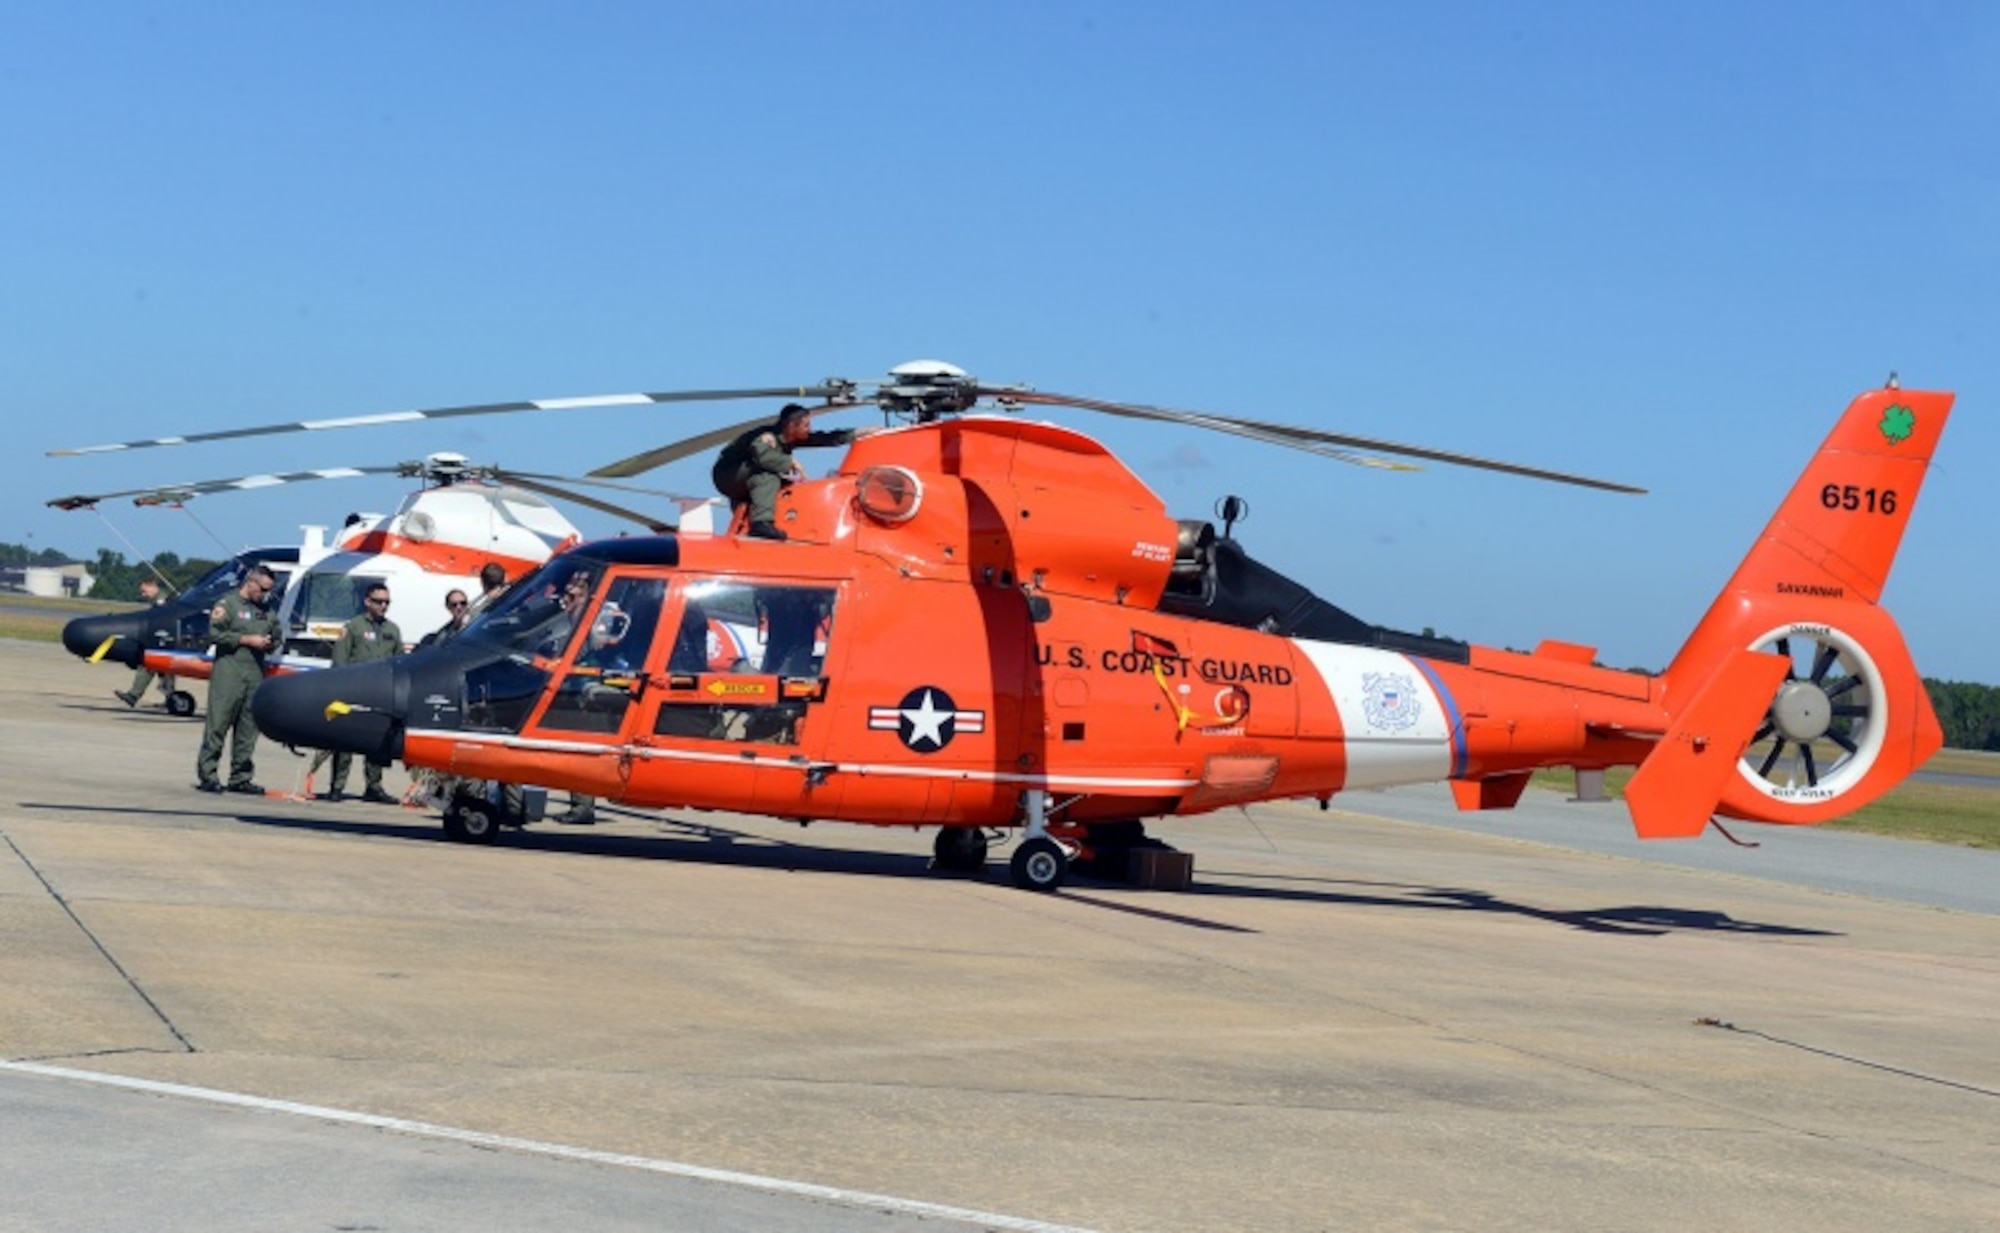 Four Coast Guard Air Station Savannah search and rescue helicopter crews arrived at Robins Air Force Base Oct. 6. They were based here in order to fly missions in response to Hurricane Matthew. The storm – the first Category 5 Atlantic hurricane since Hurricane Felix in 2007 – struck eastern Florida Oct. 6. It made its way up the east coast to Georgia and the Carolinas Friday and over the weekend before dissipating Monday. (U.S. Air Force photo by Tommie Horton)